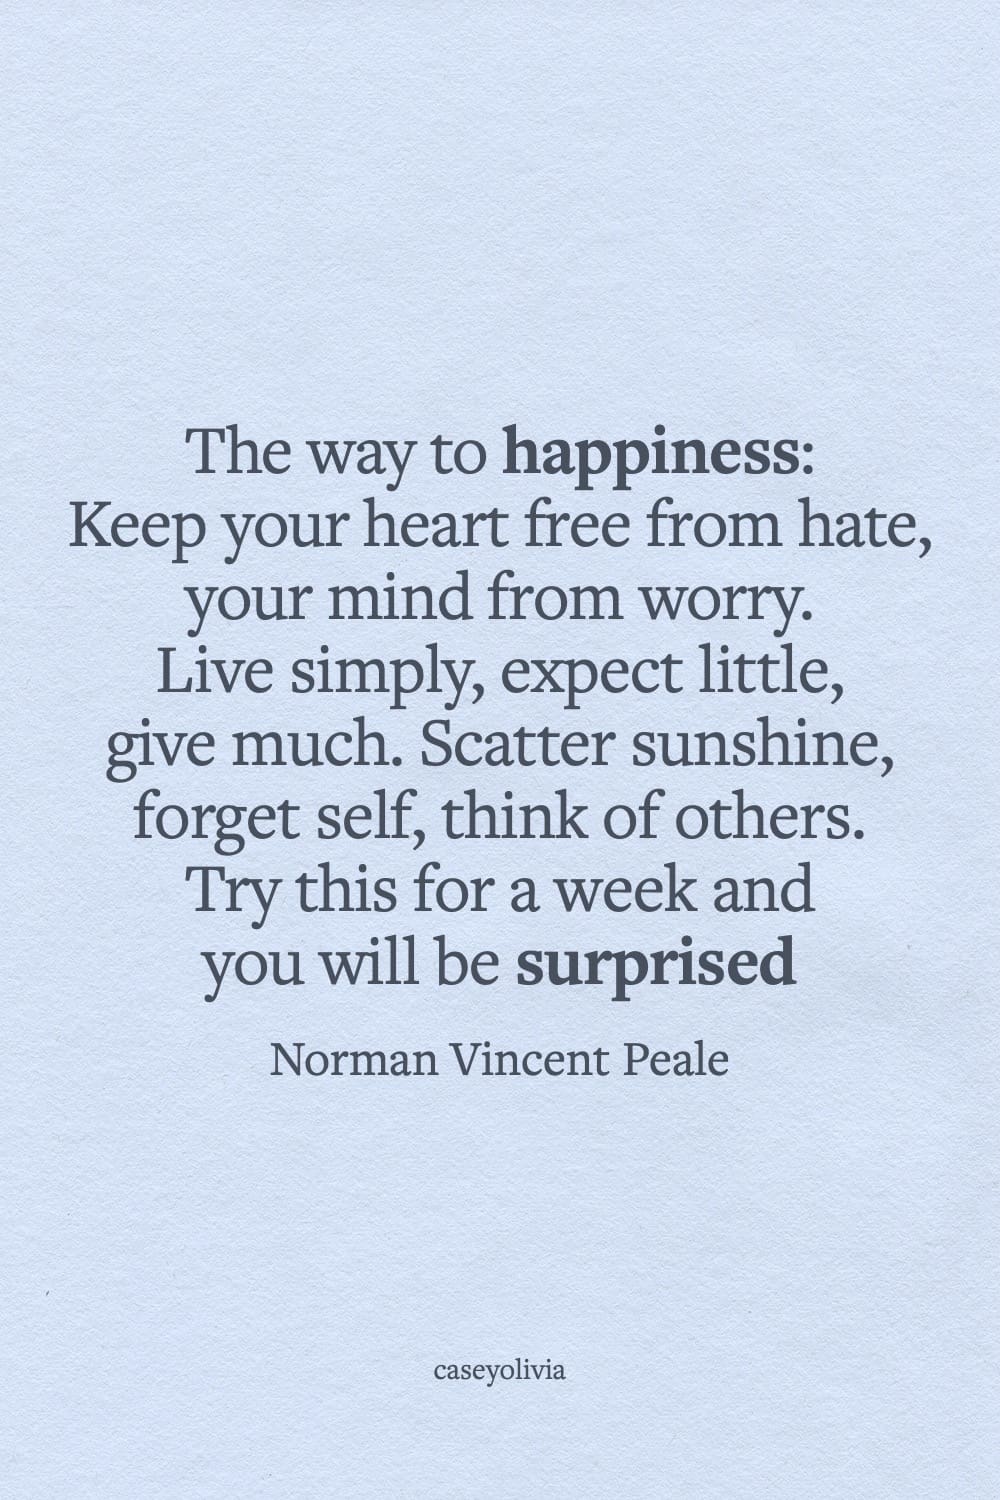 norman vincent peale the way to happiness quote image